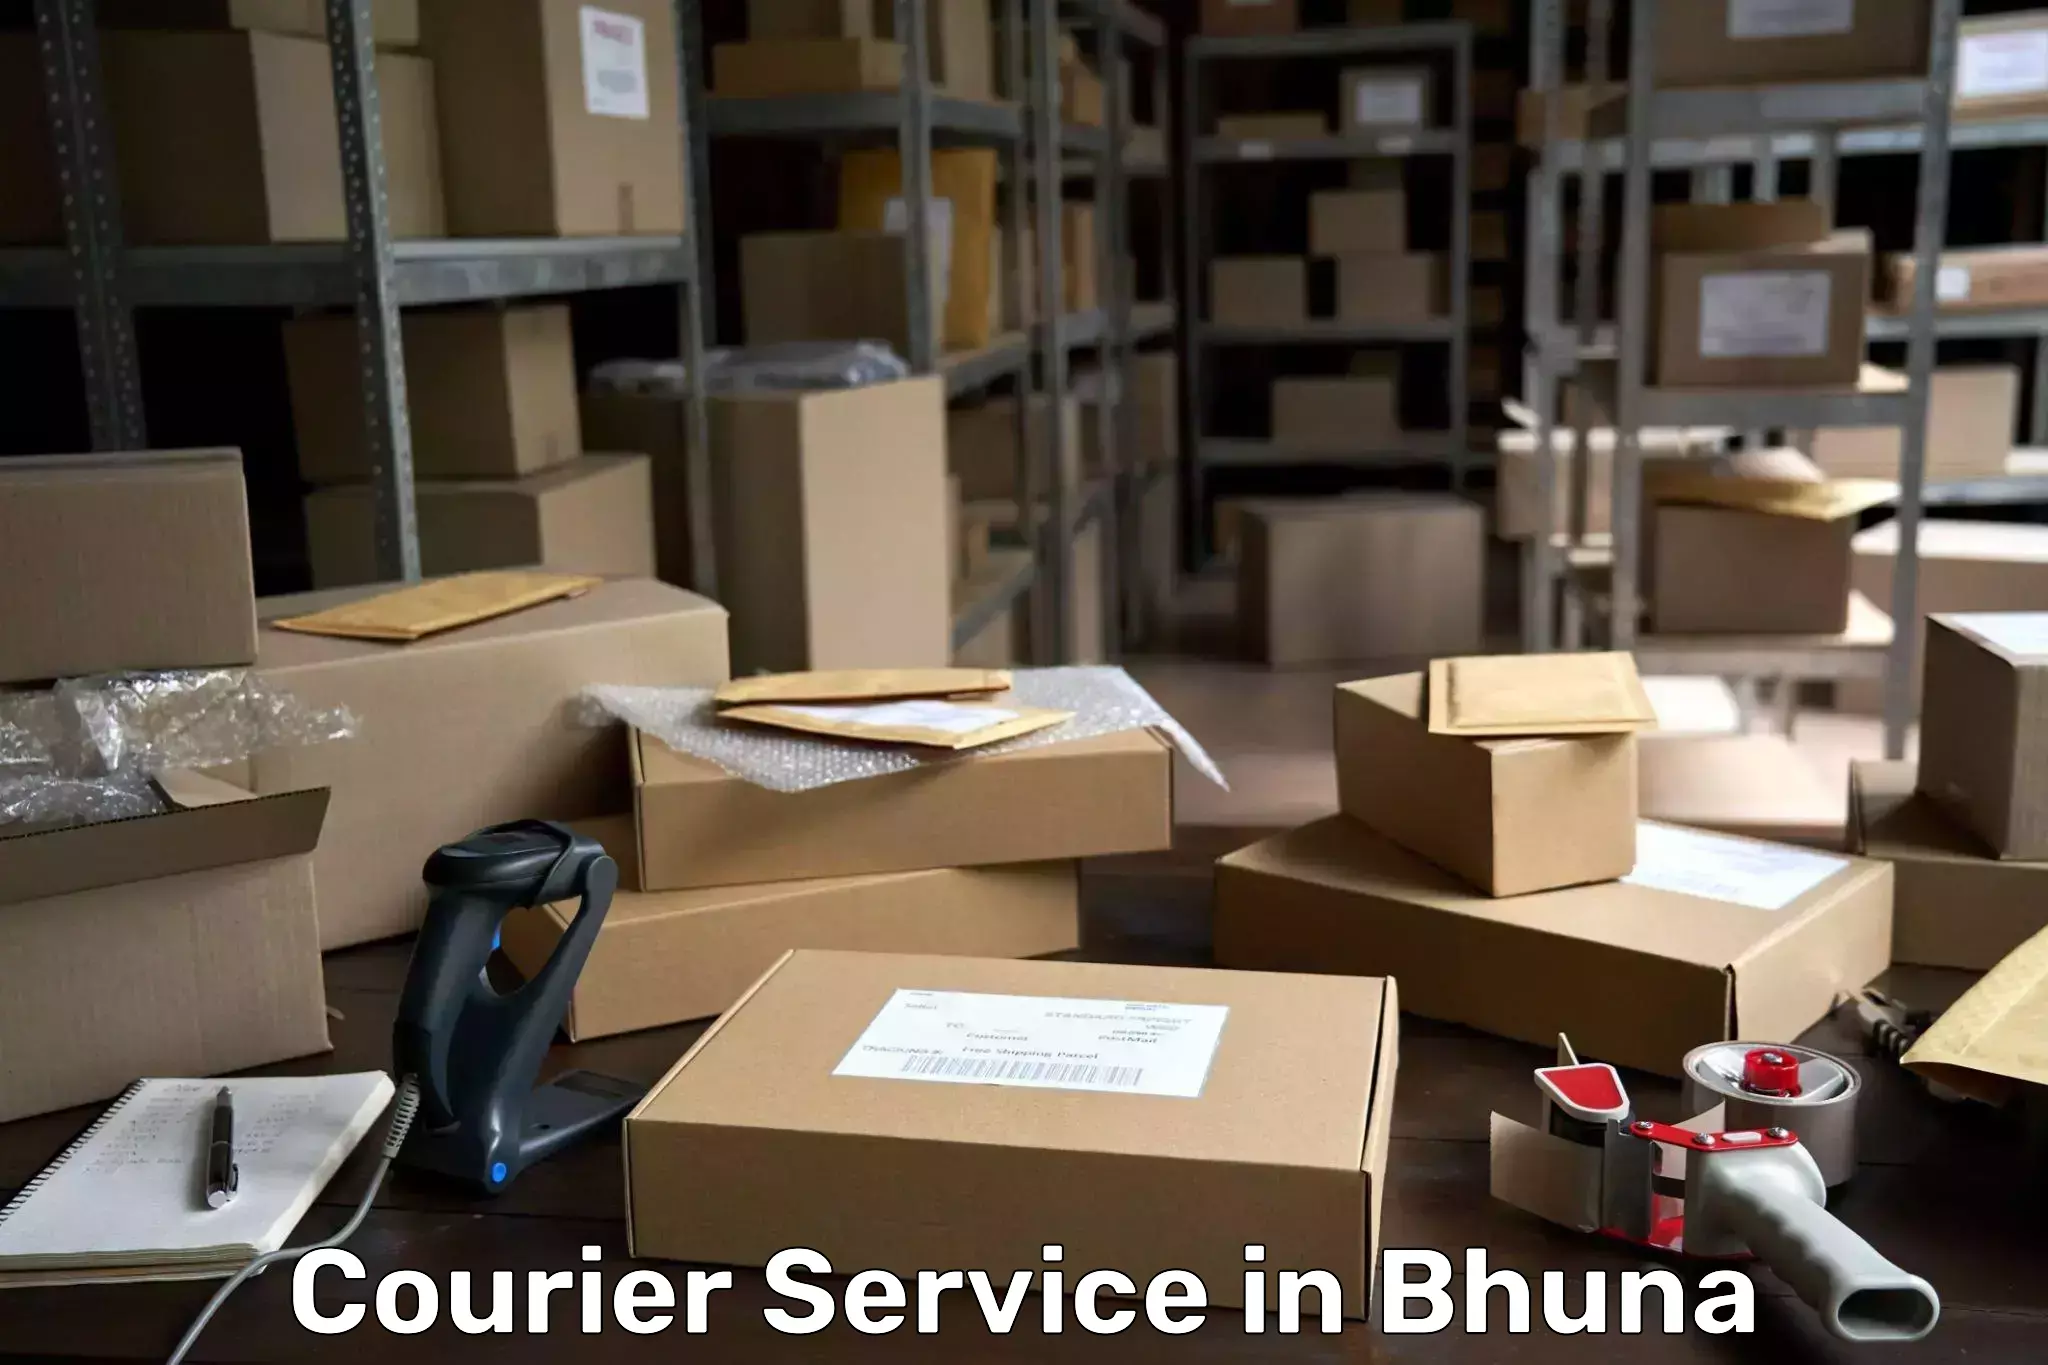 24-hour courier service in Bhuna